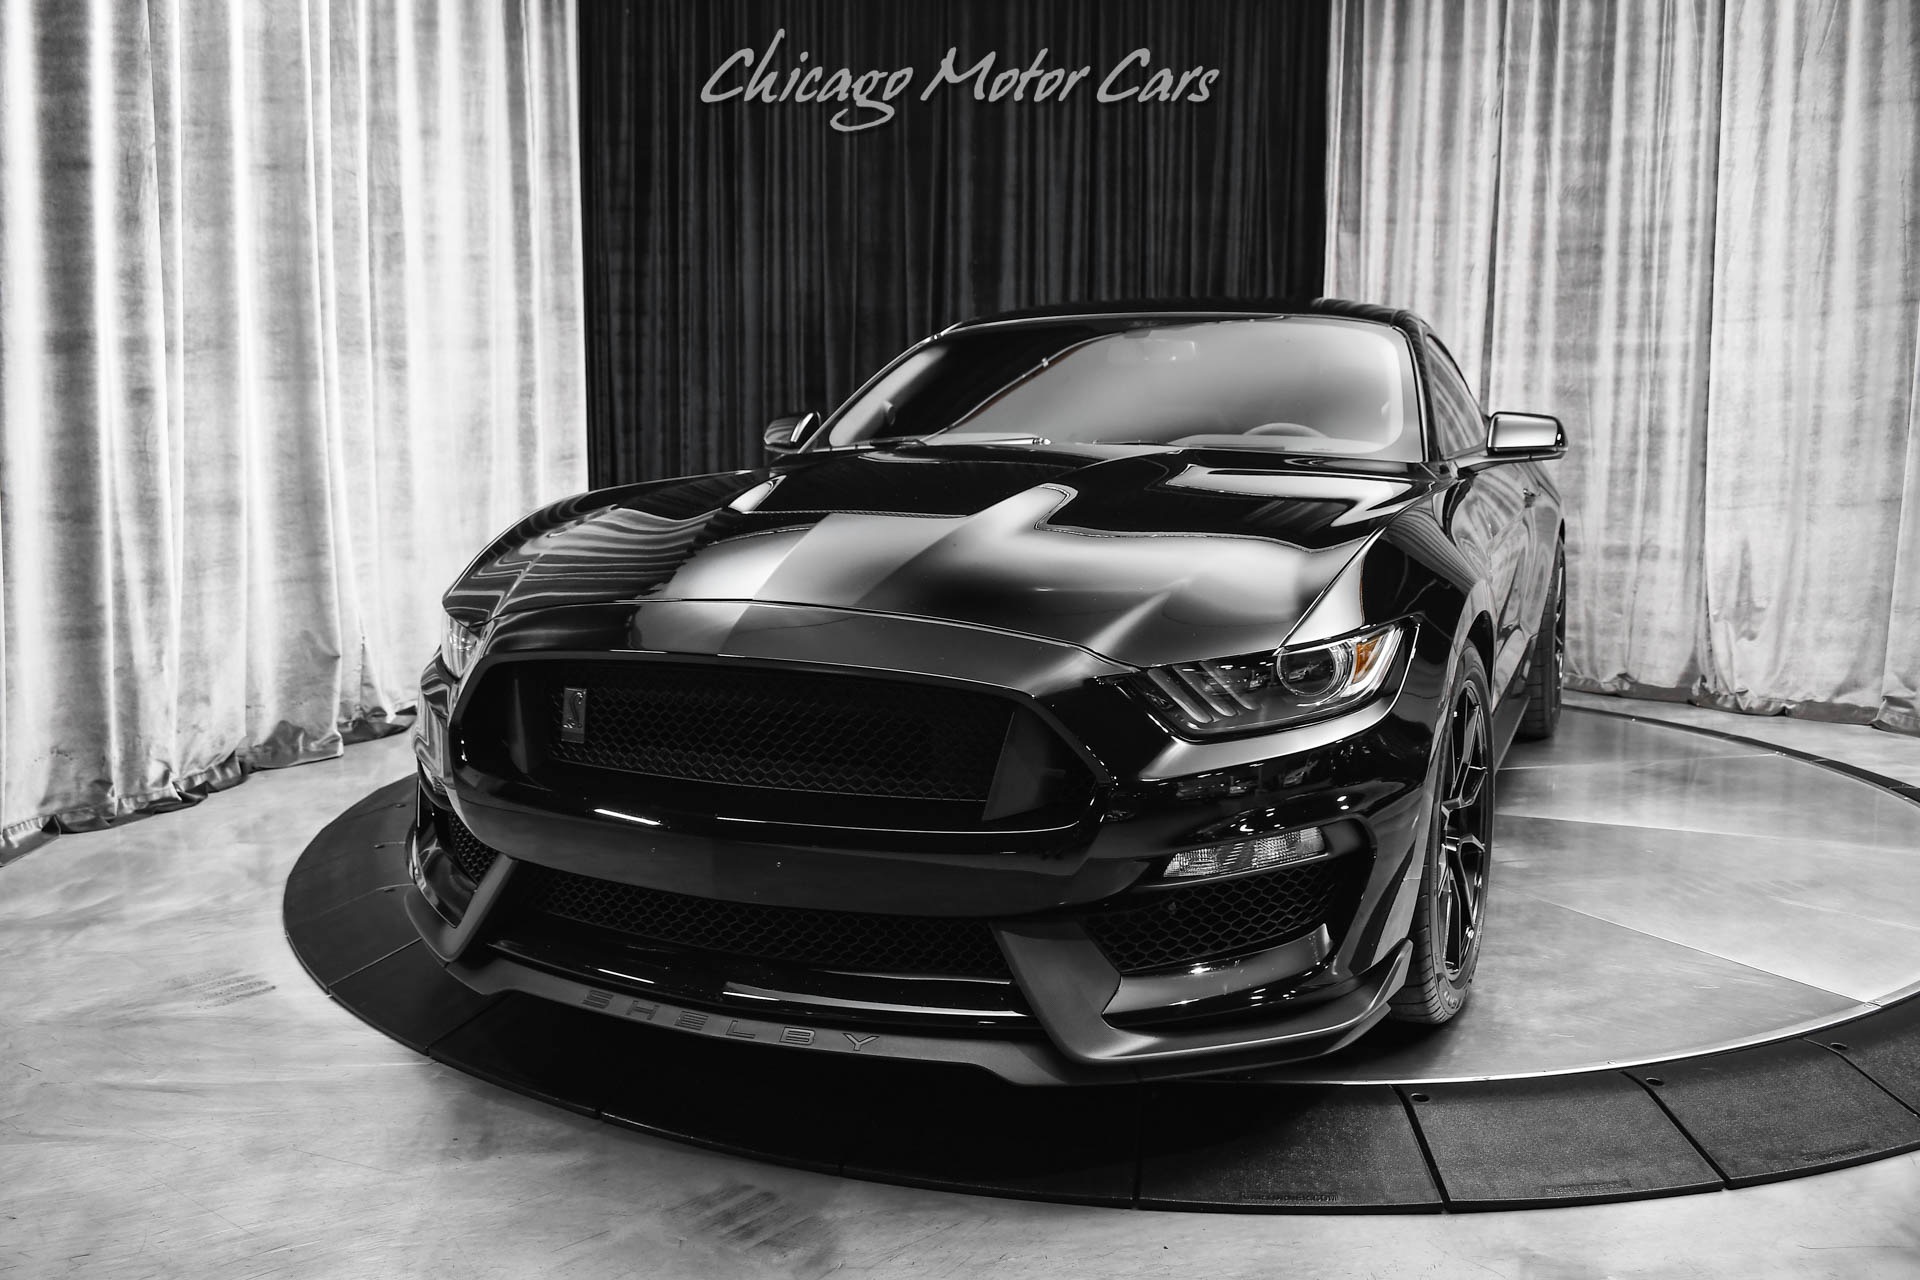 Used-2019-Ford-Mustang-Shelby-GT350-Only-8k-Miles-Electronics-Package-Completely-Stock